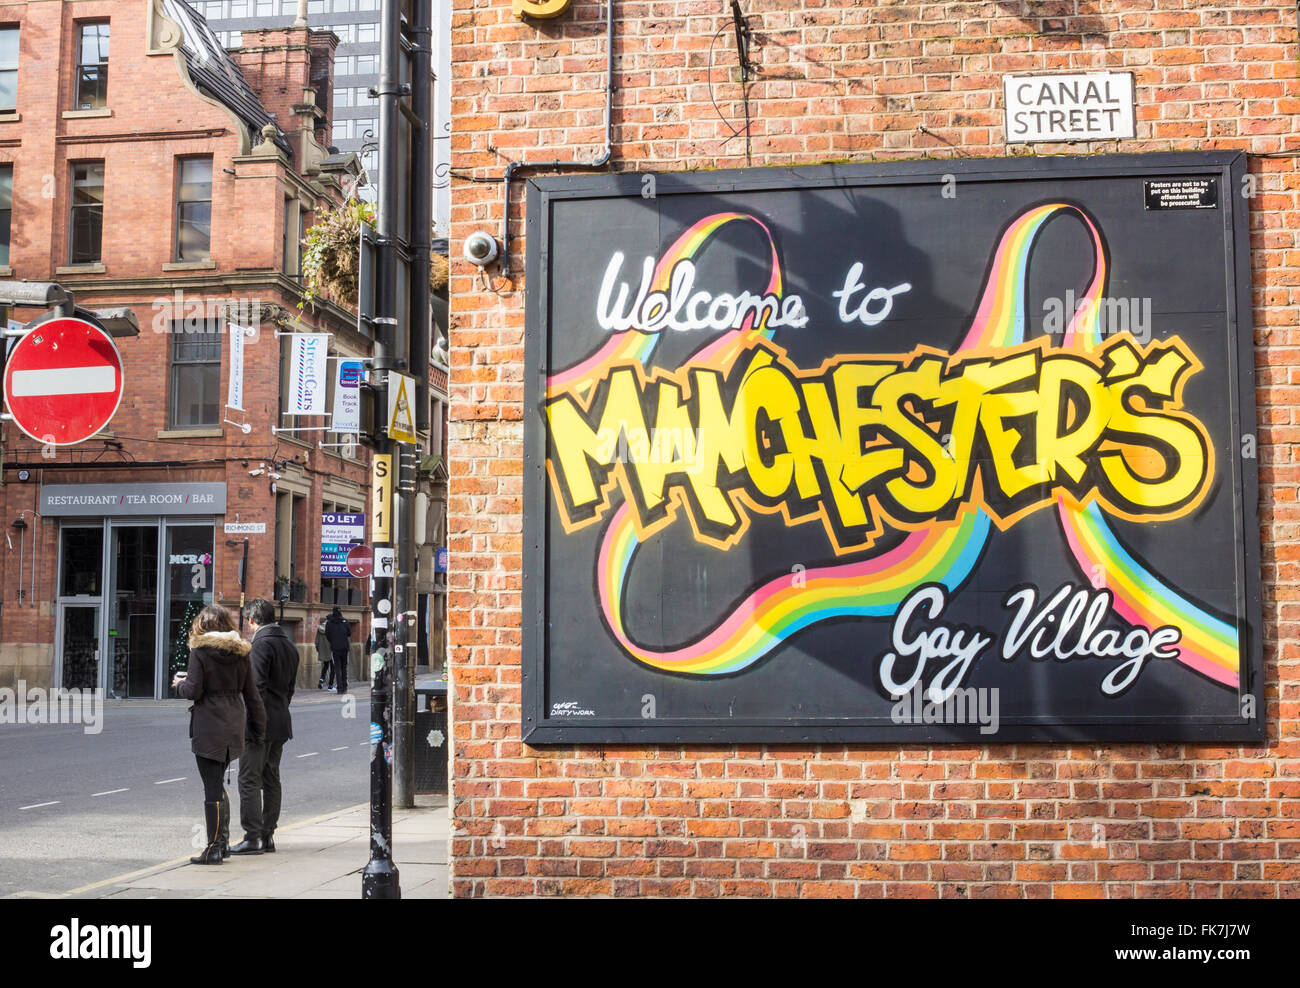 Sign saying 'Welcome to Manchester`s Gay village'. Canal street, Manchester, England. UK Stock Photo